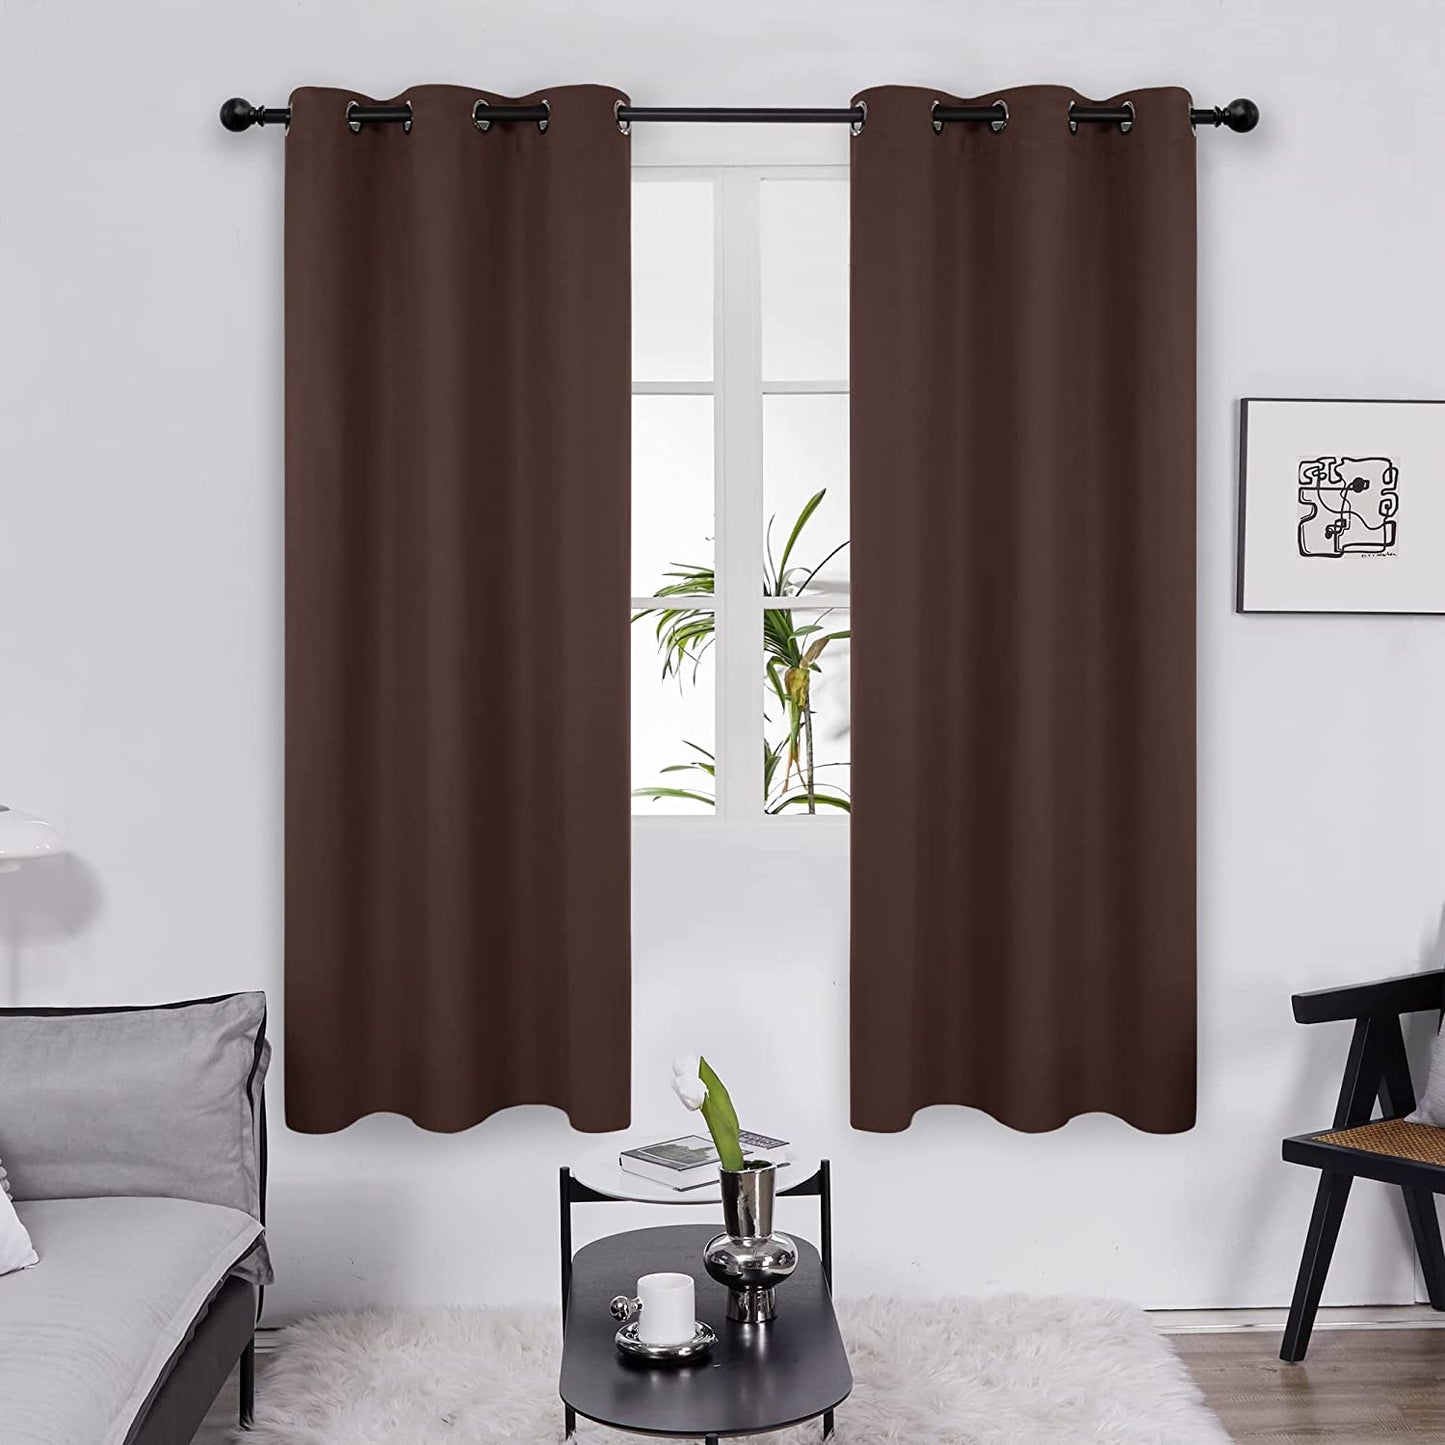 Deconovo 100% Blackout Curtains Room Darkening Thermal Insulated Blackout Grommet Window Curtain for Living Room,Black,42X120-Inch,1 Panel  Deconovo Chocolate 42X63 Inch 